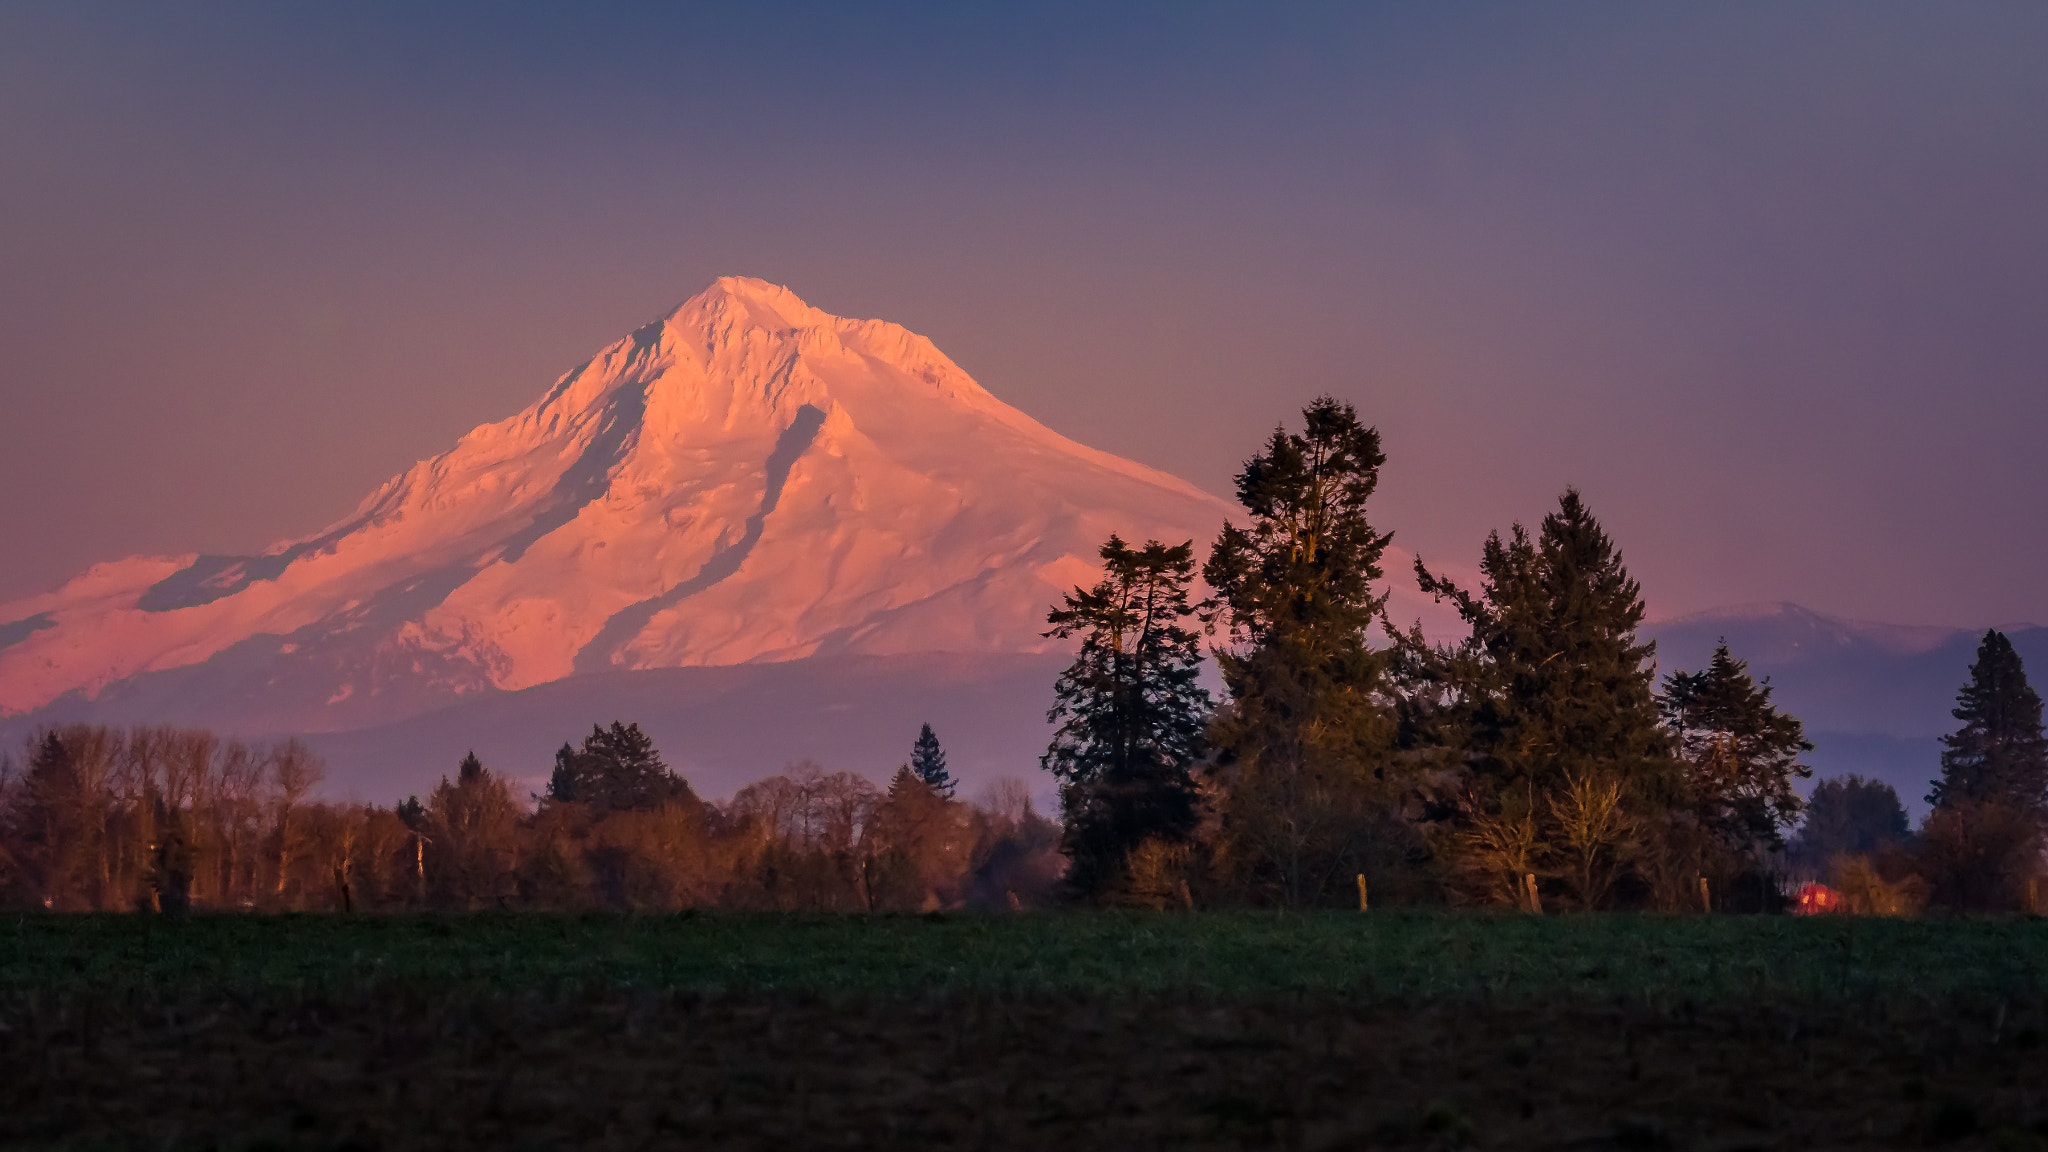 150-600mm F5-6.3 DG OS HSM | Con sample photo. Did i hear someone say "alpenglow on mount hood"? photography